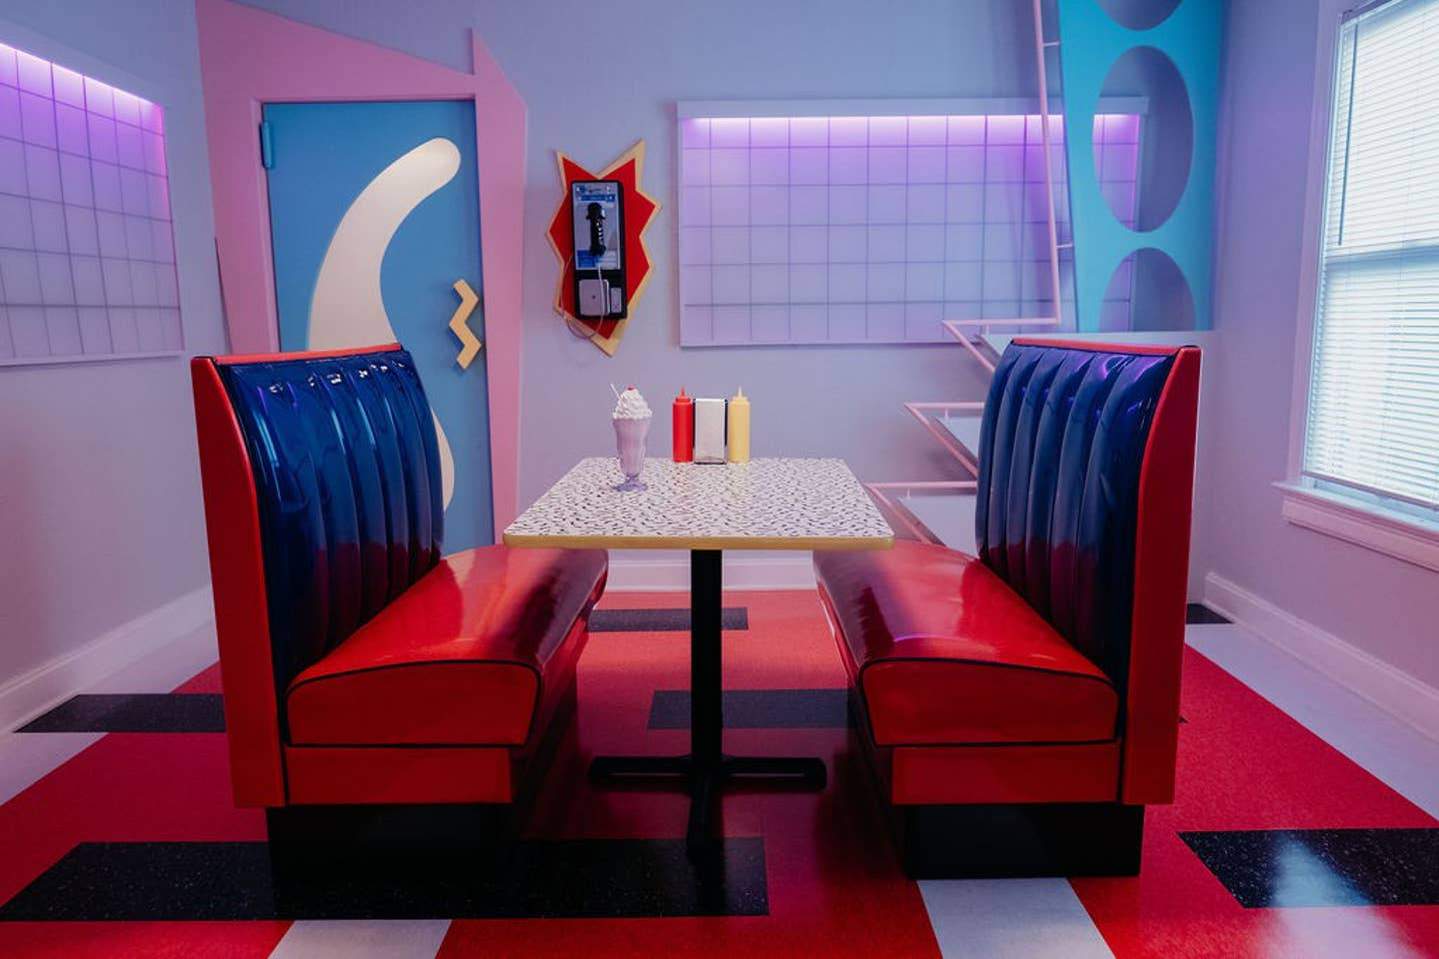 This ‘Saved by the Bell’ themed Airbnb in Dallas will make you feel like a 90′s kid